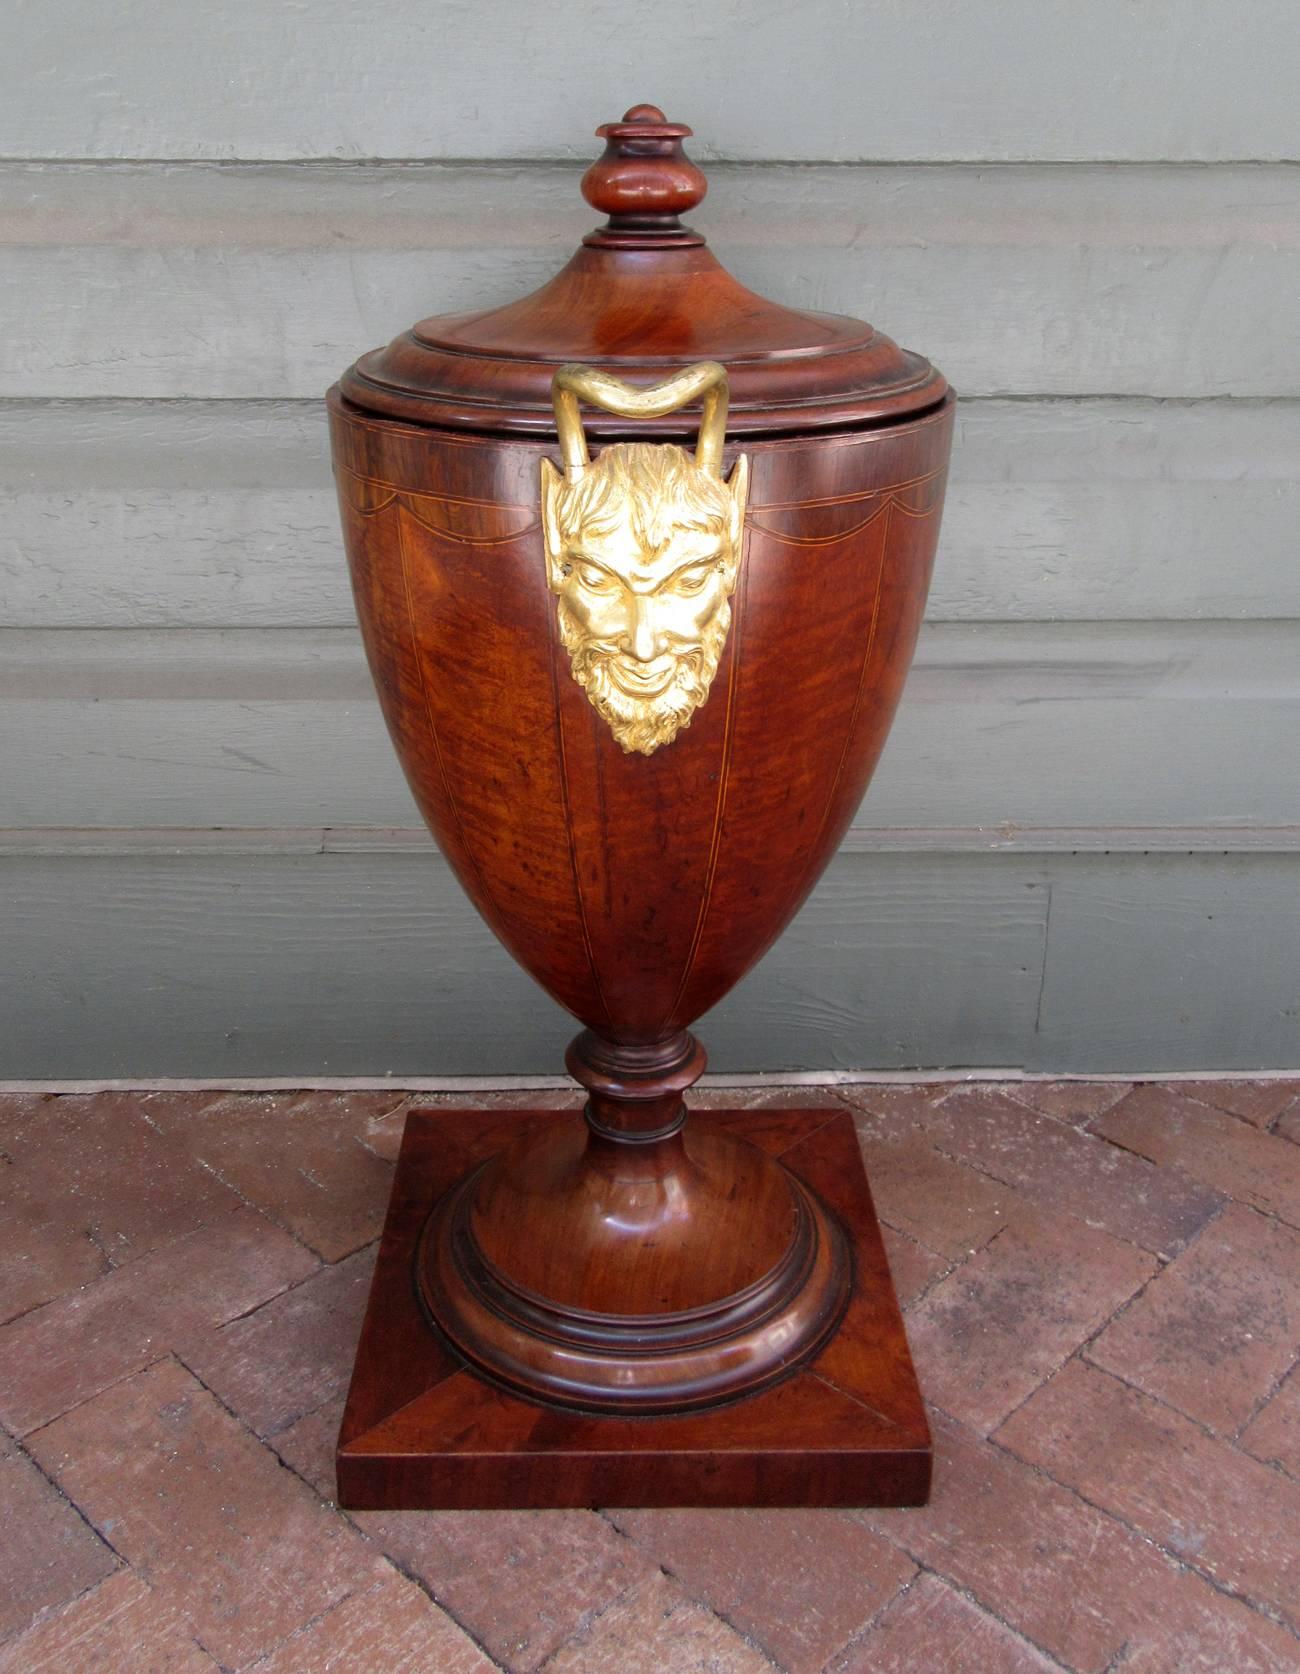 Gilt Late 18th Century English George III Mahogany and Bronze Doré Urn or Wine Cooler